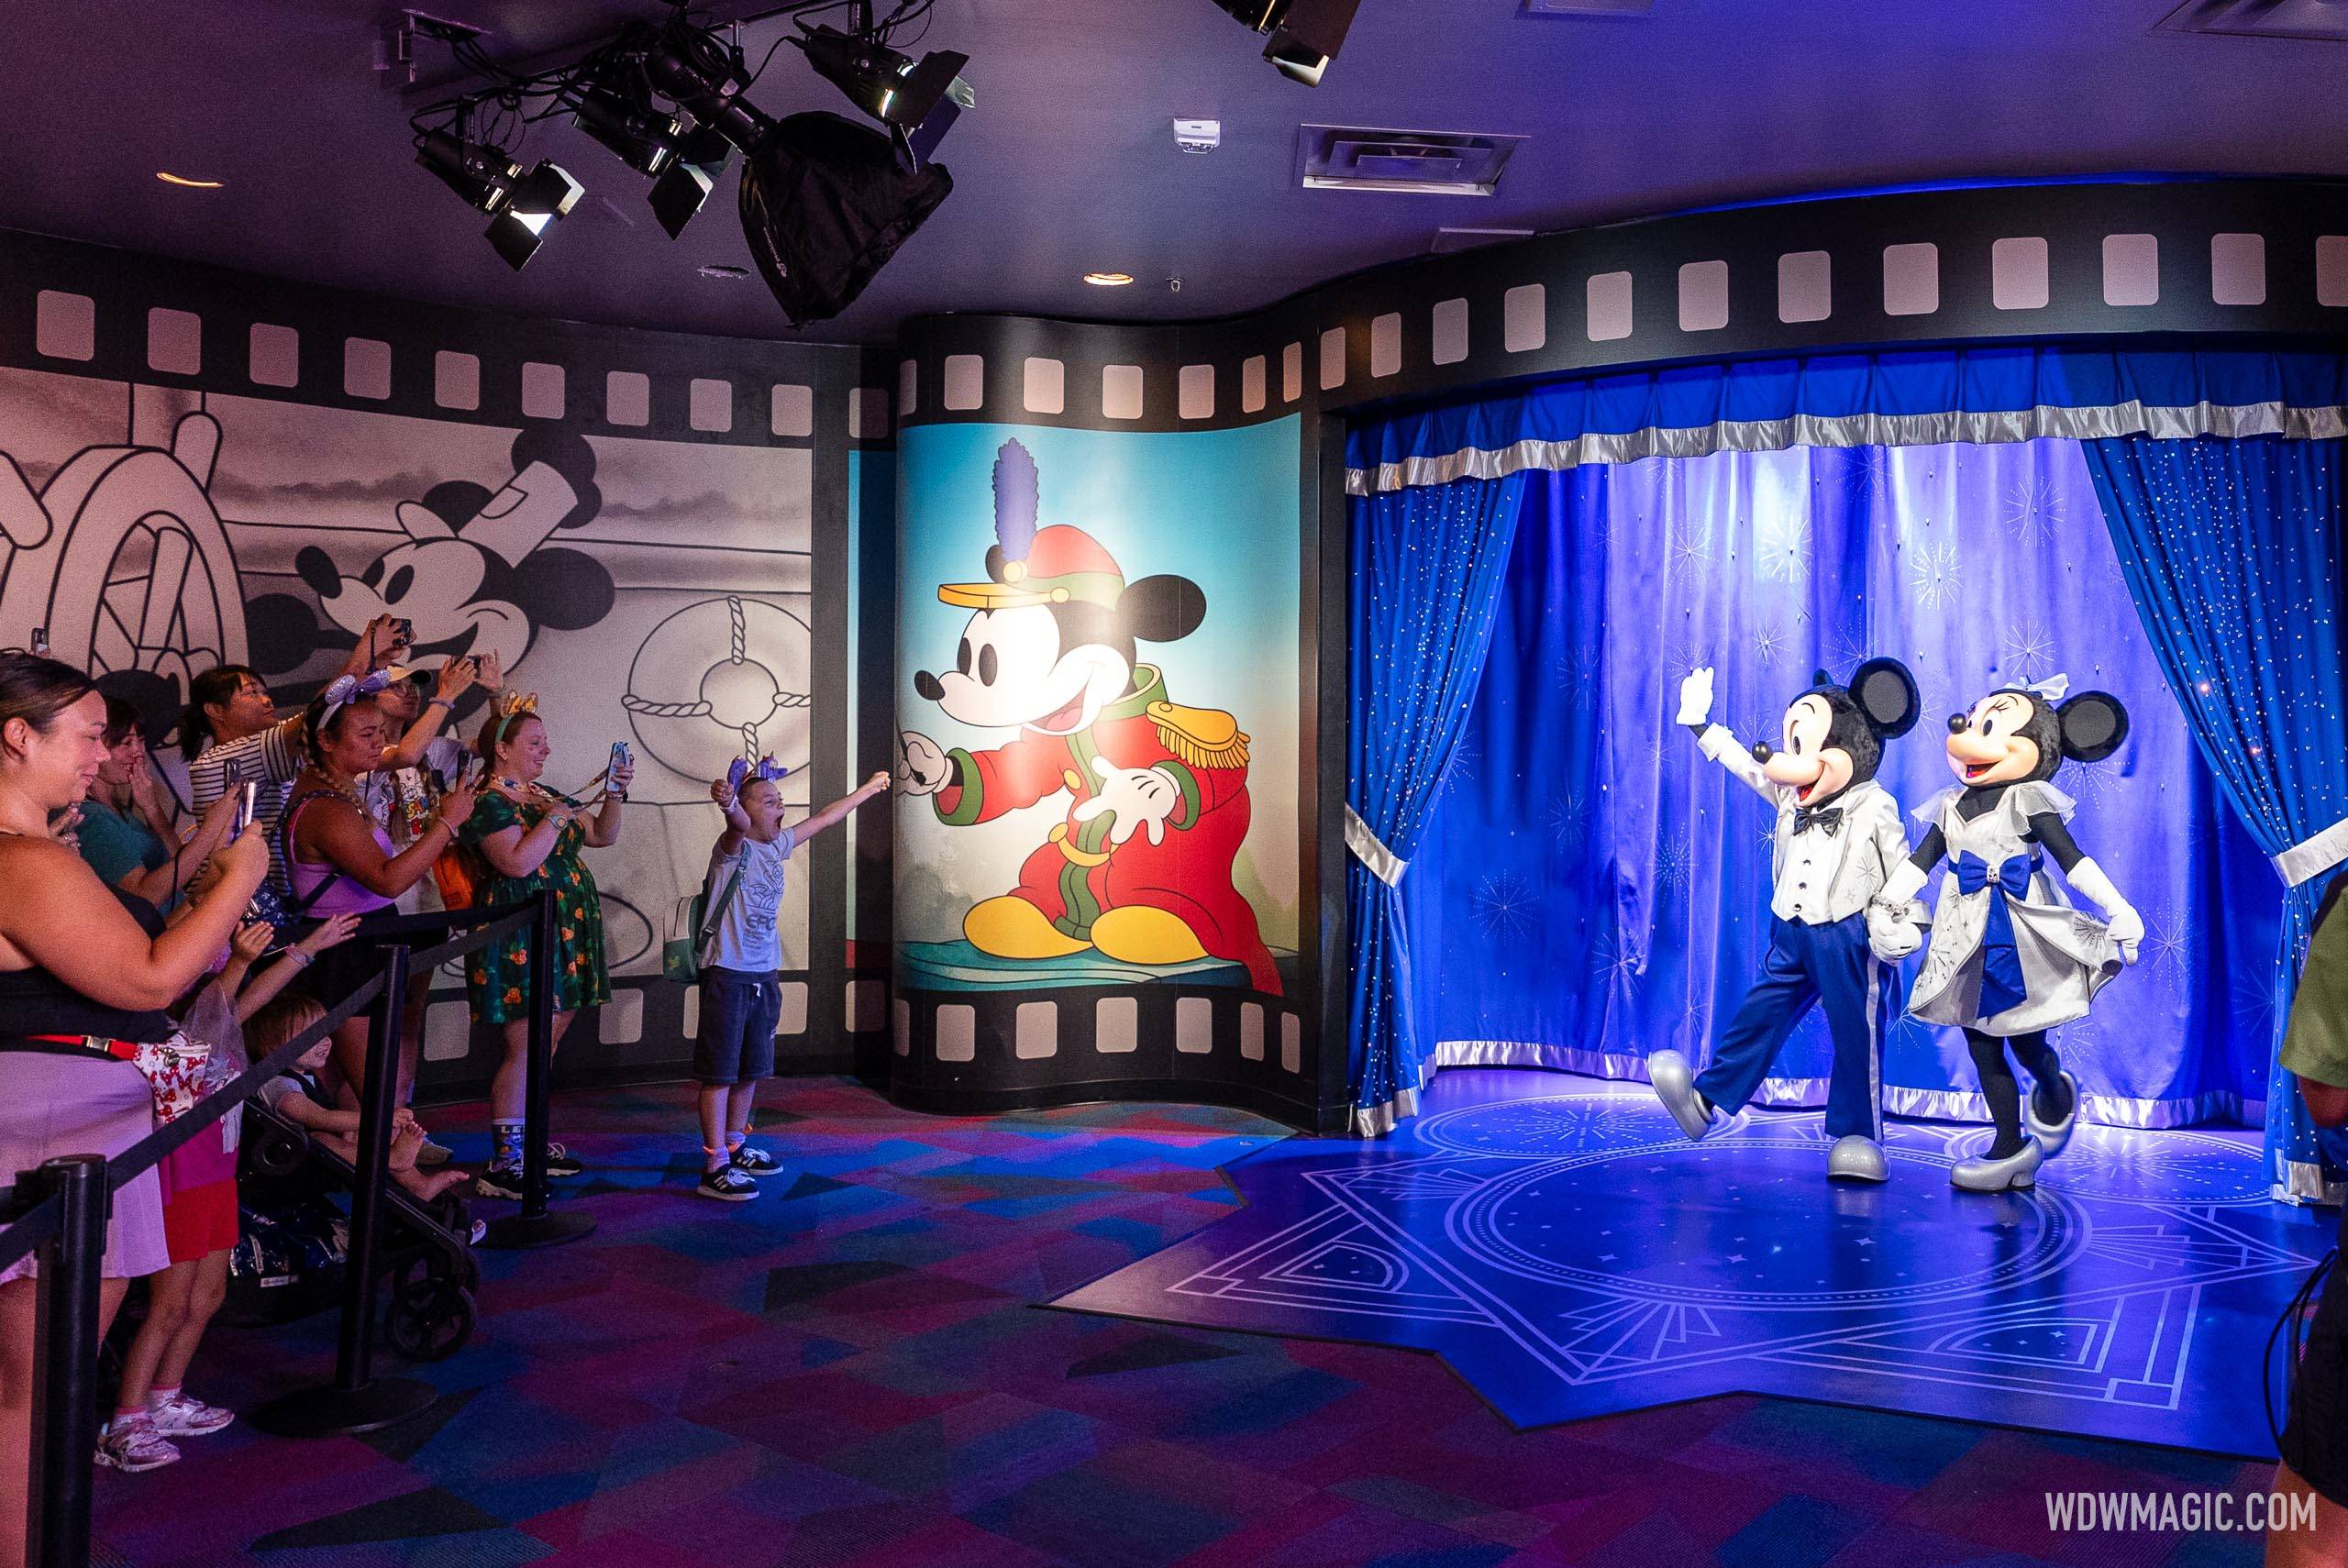 Disney100 brings together Minnie and Mickey at EPCOT for new meet and greet